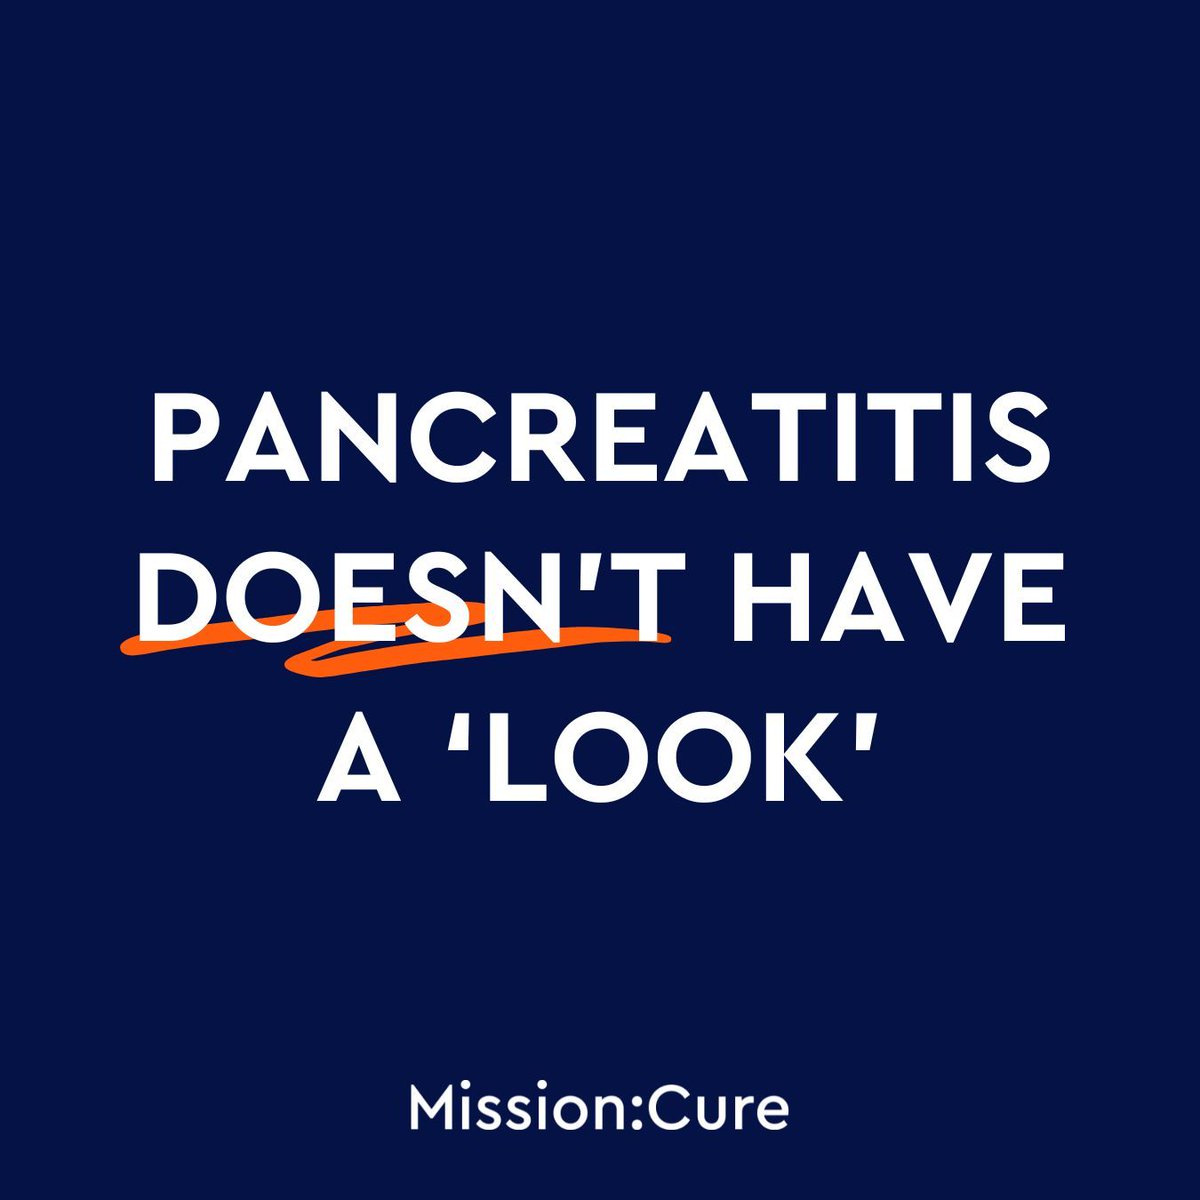 #Pancreatitis doesn't have a look! It can affect anyone, regardless of age, weight, ethnicity, gender, or more. Let's break free from the stereotypes and raise awareness. 💪💙 When we do, patients can get diagnosed earlier and the support they need. #GITwitter